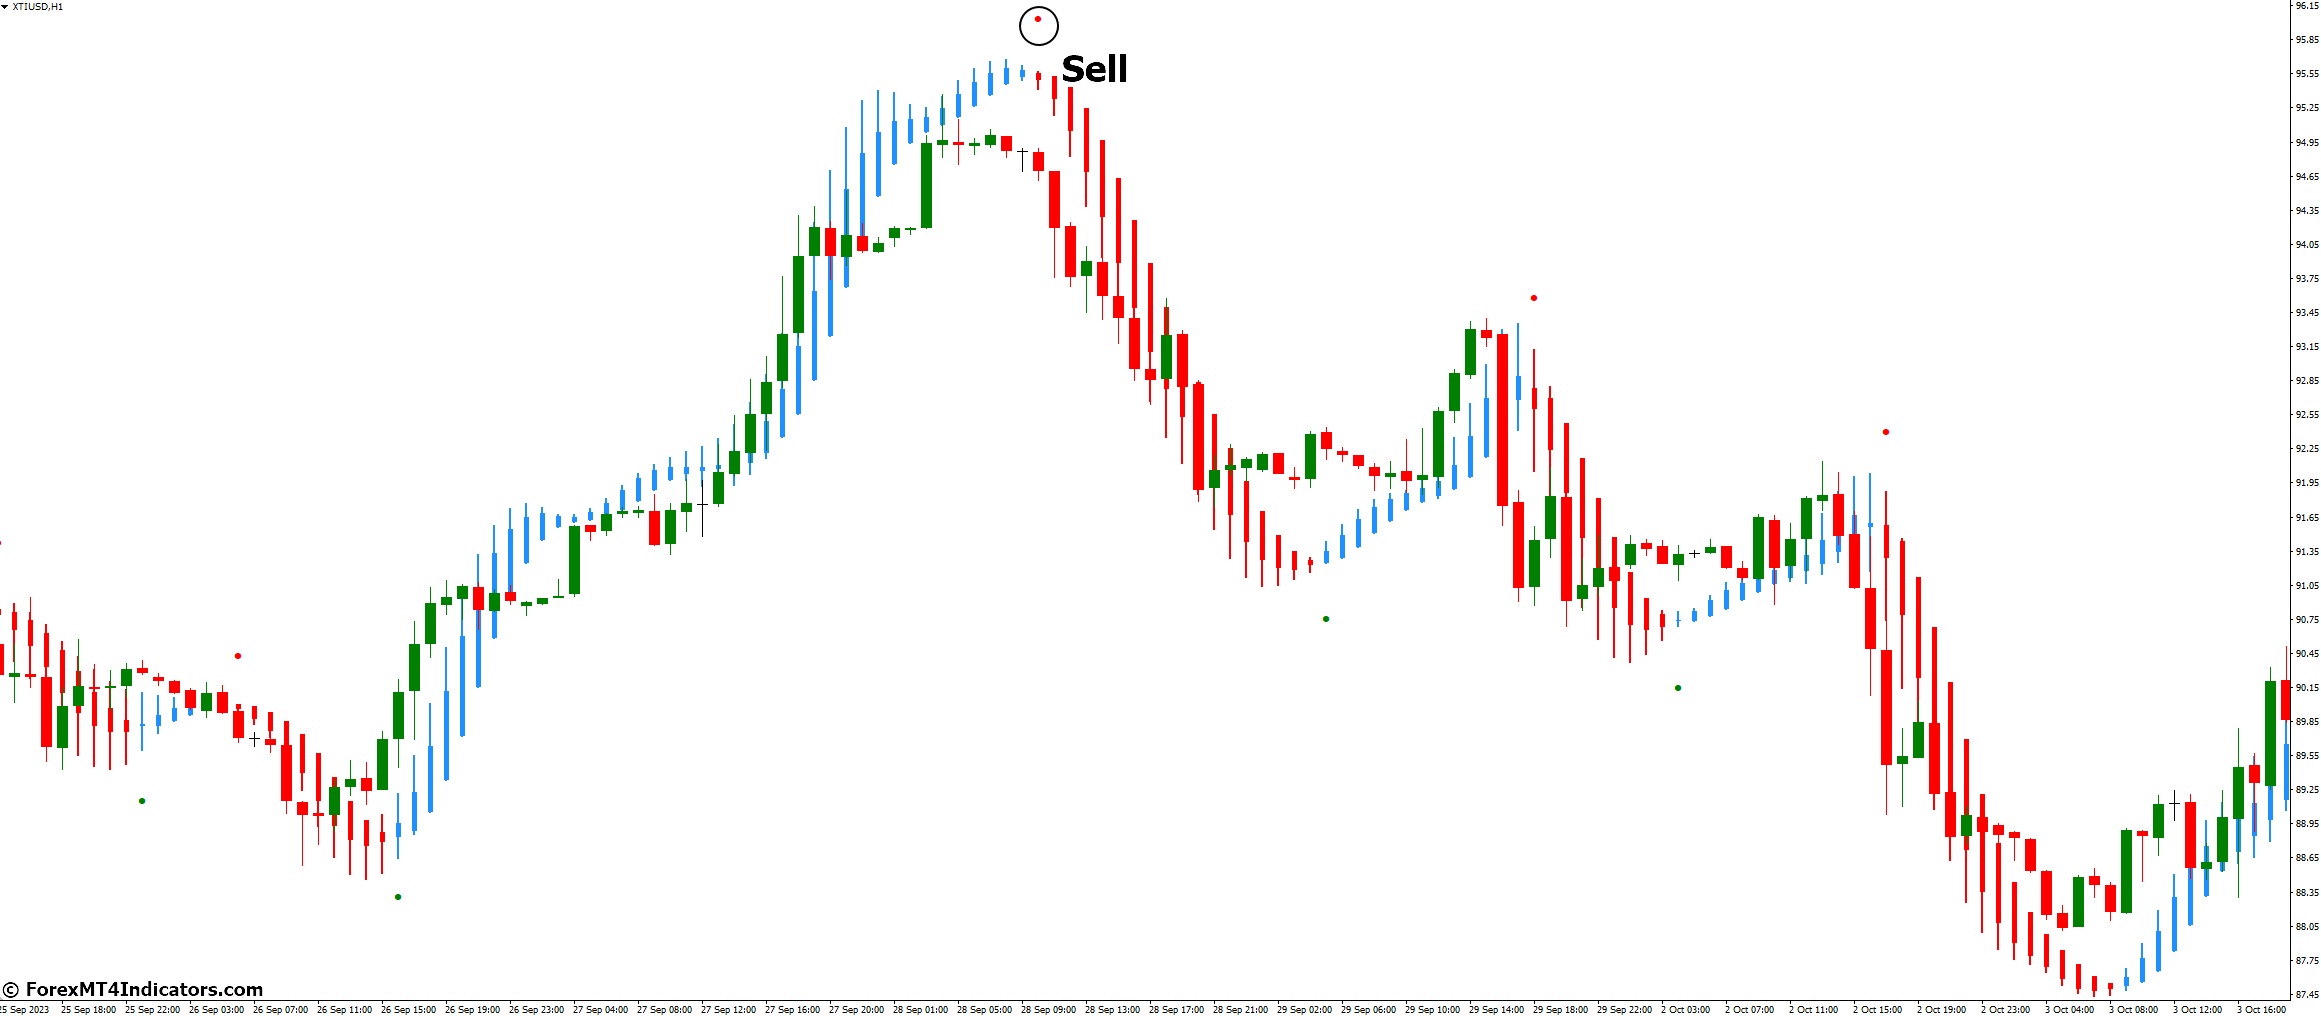 How to Trade with Heiken Ashi MA T3 New Indicator - Sell Entry